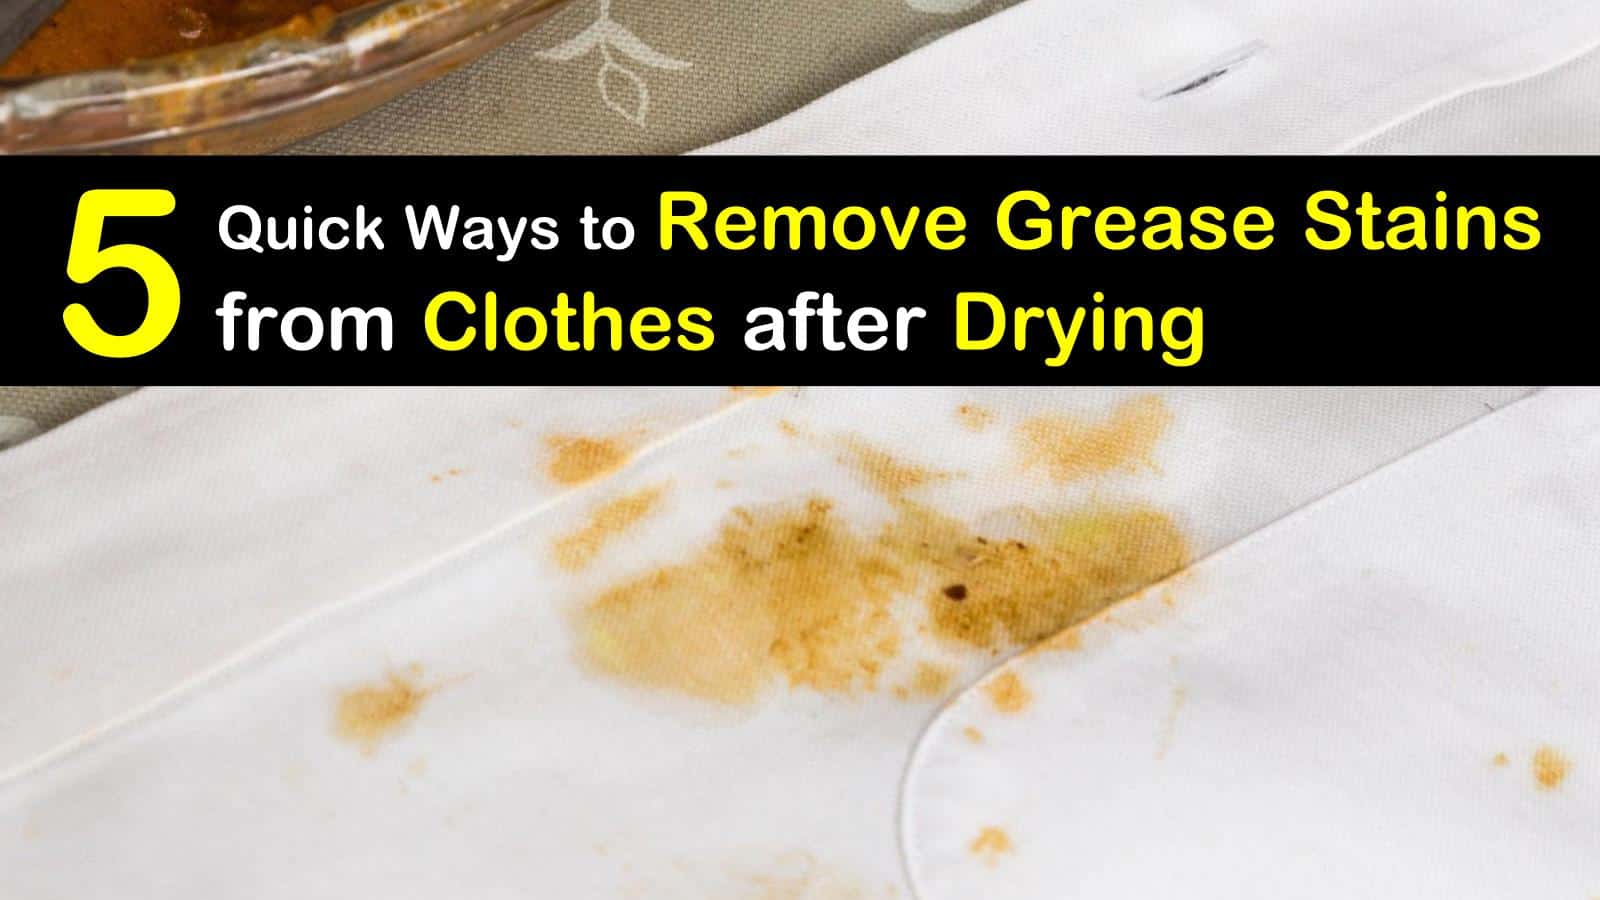 how to remove grease stains from clothes after drying titleimg1